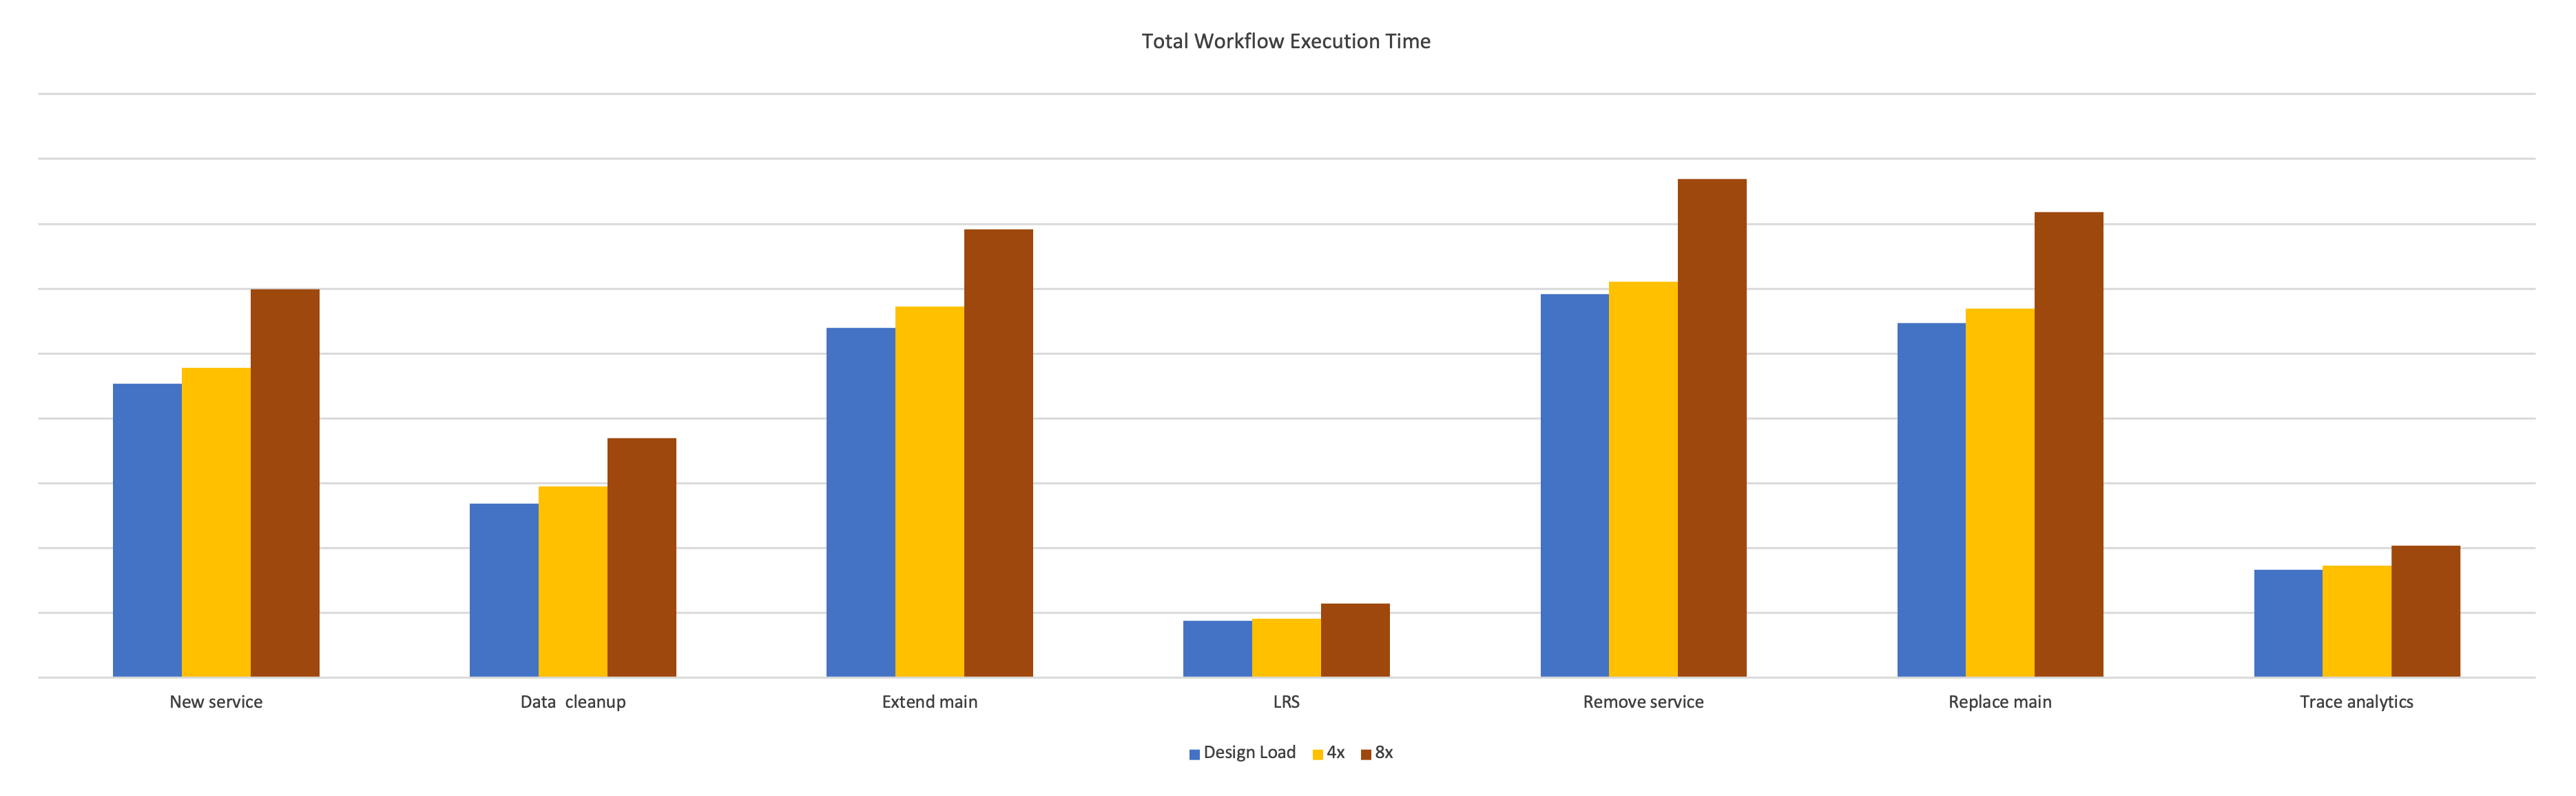 Conducted workflow times in ArcGIS Pro across each tested design load scenario